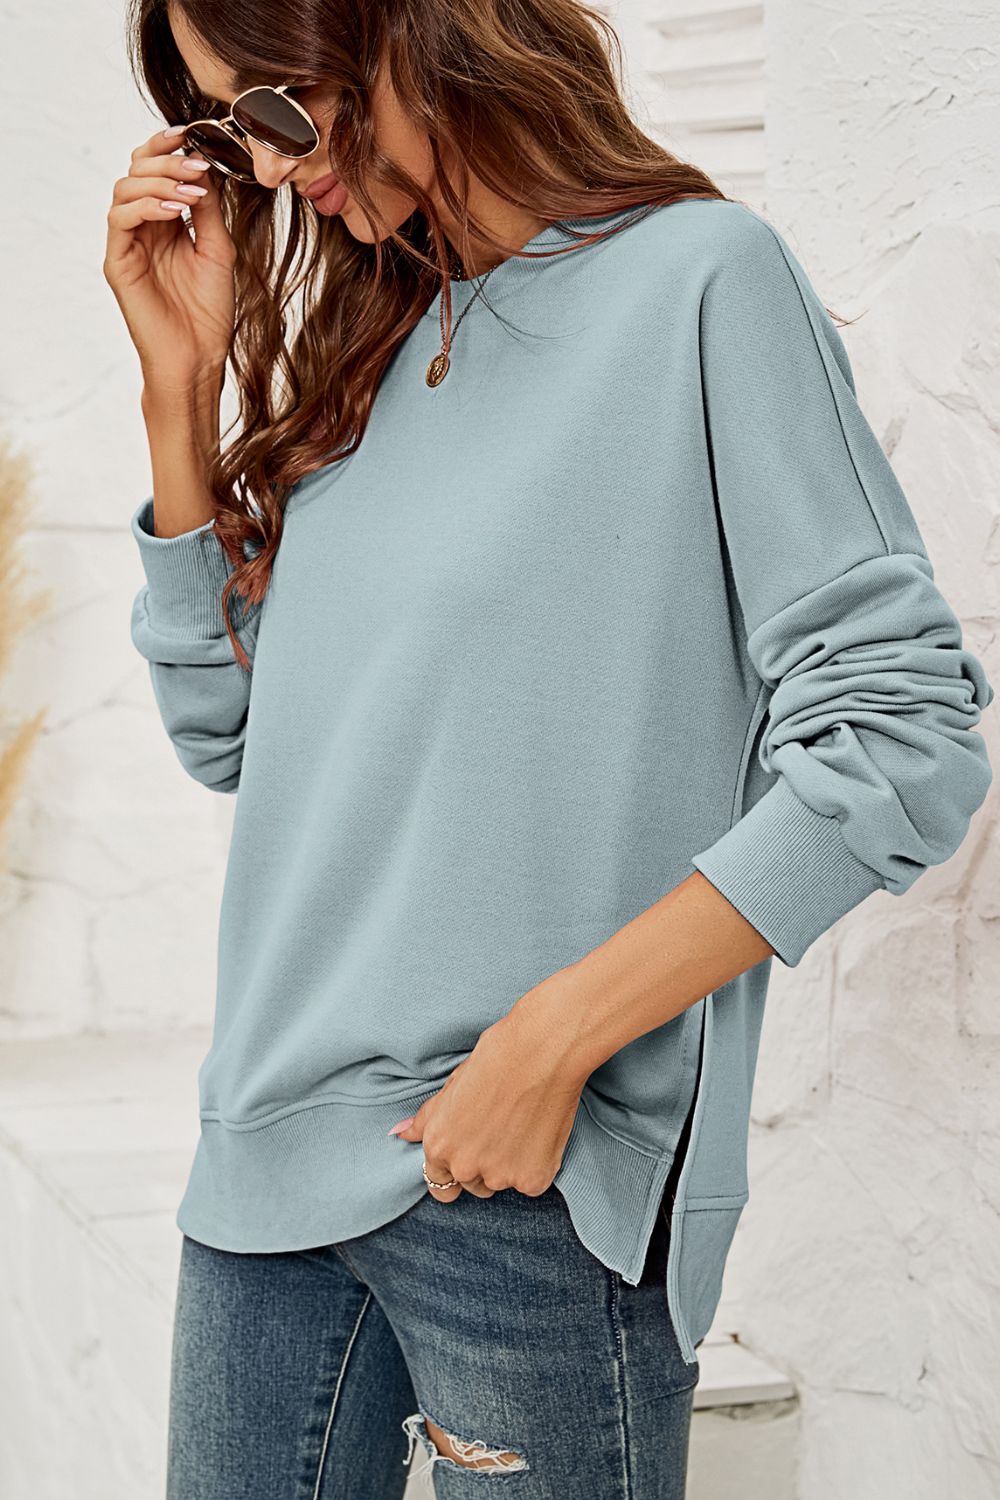 Round Neck Dropped Shoulder Slit Sweatshirt Available in Several Colors